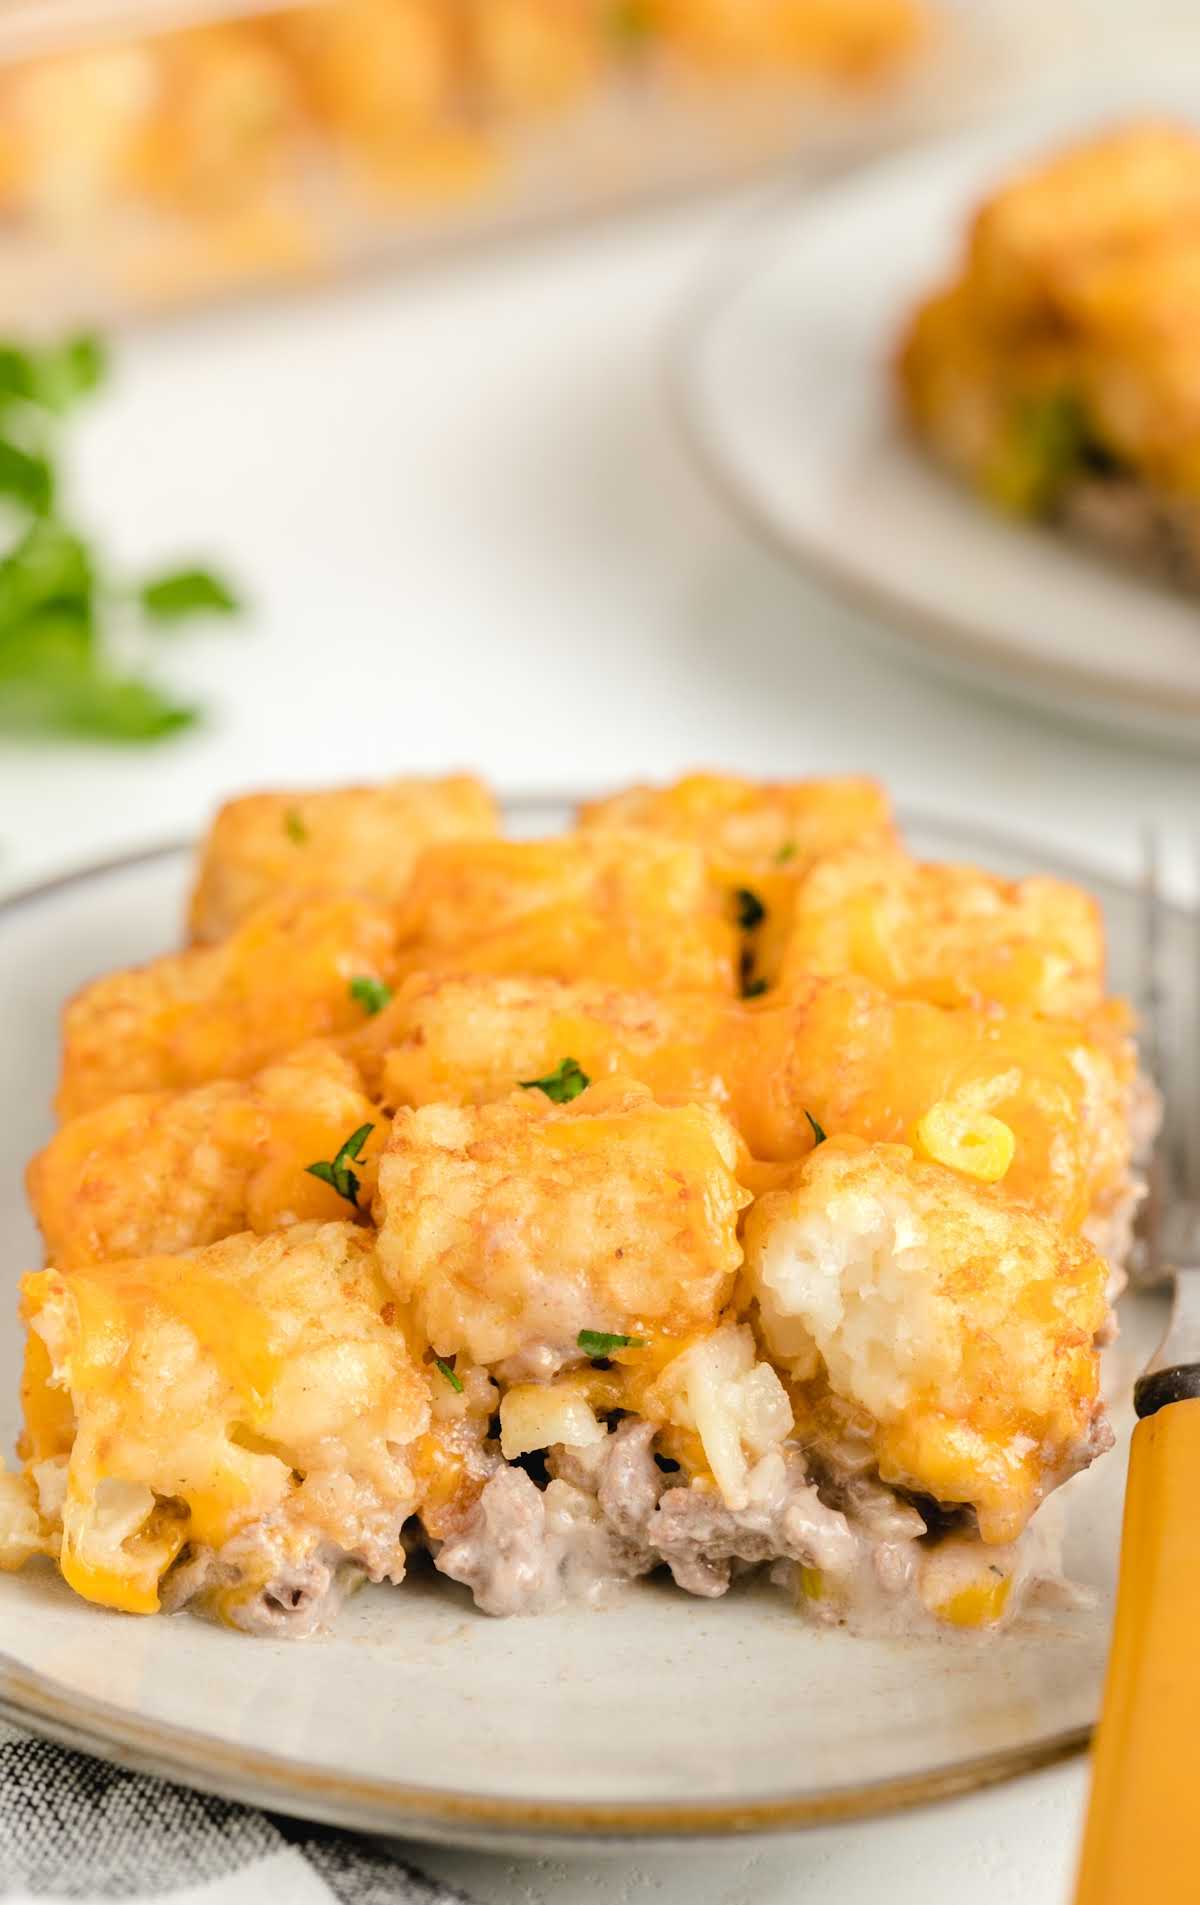 close up shot of a plate of tater tot casserole garnished with parsley